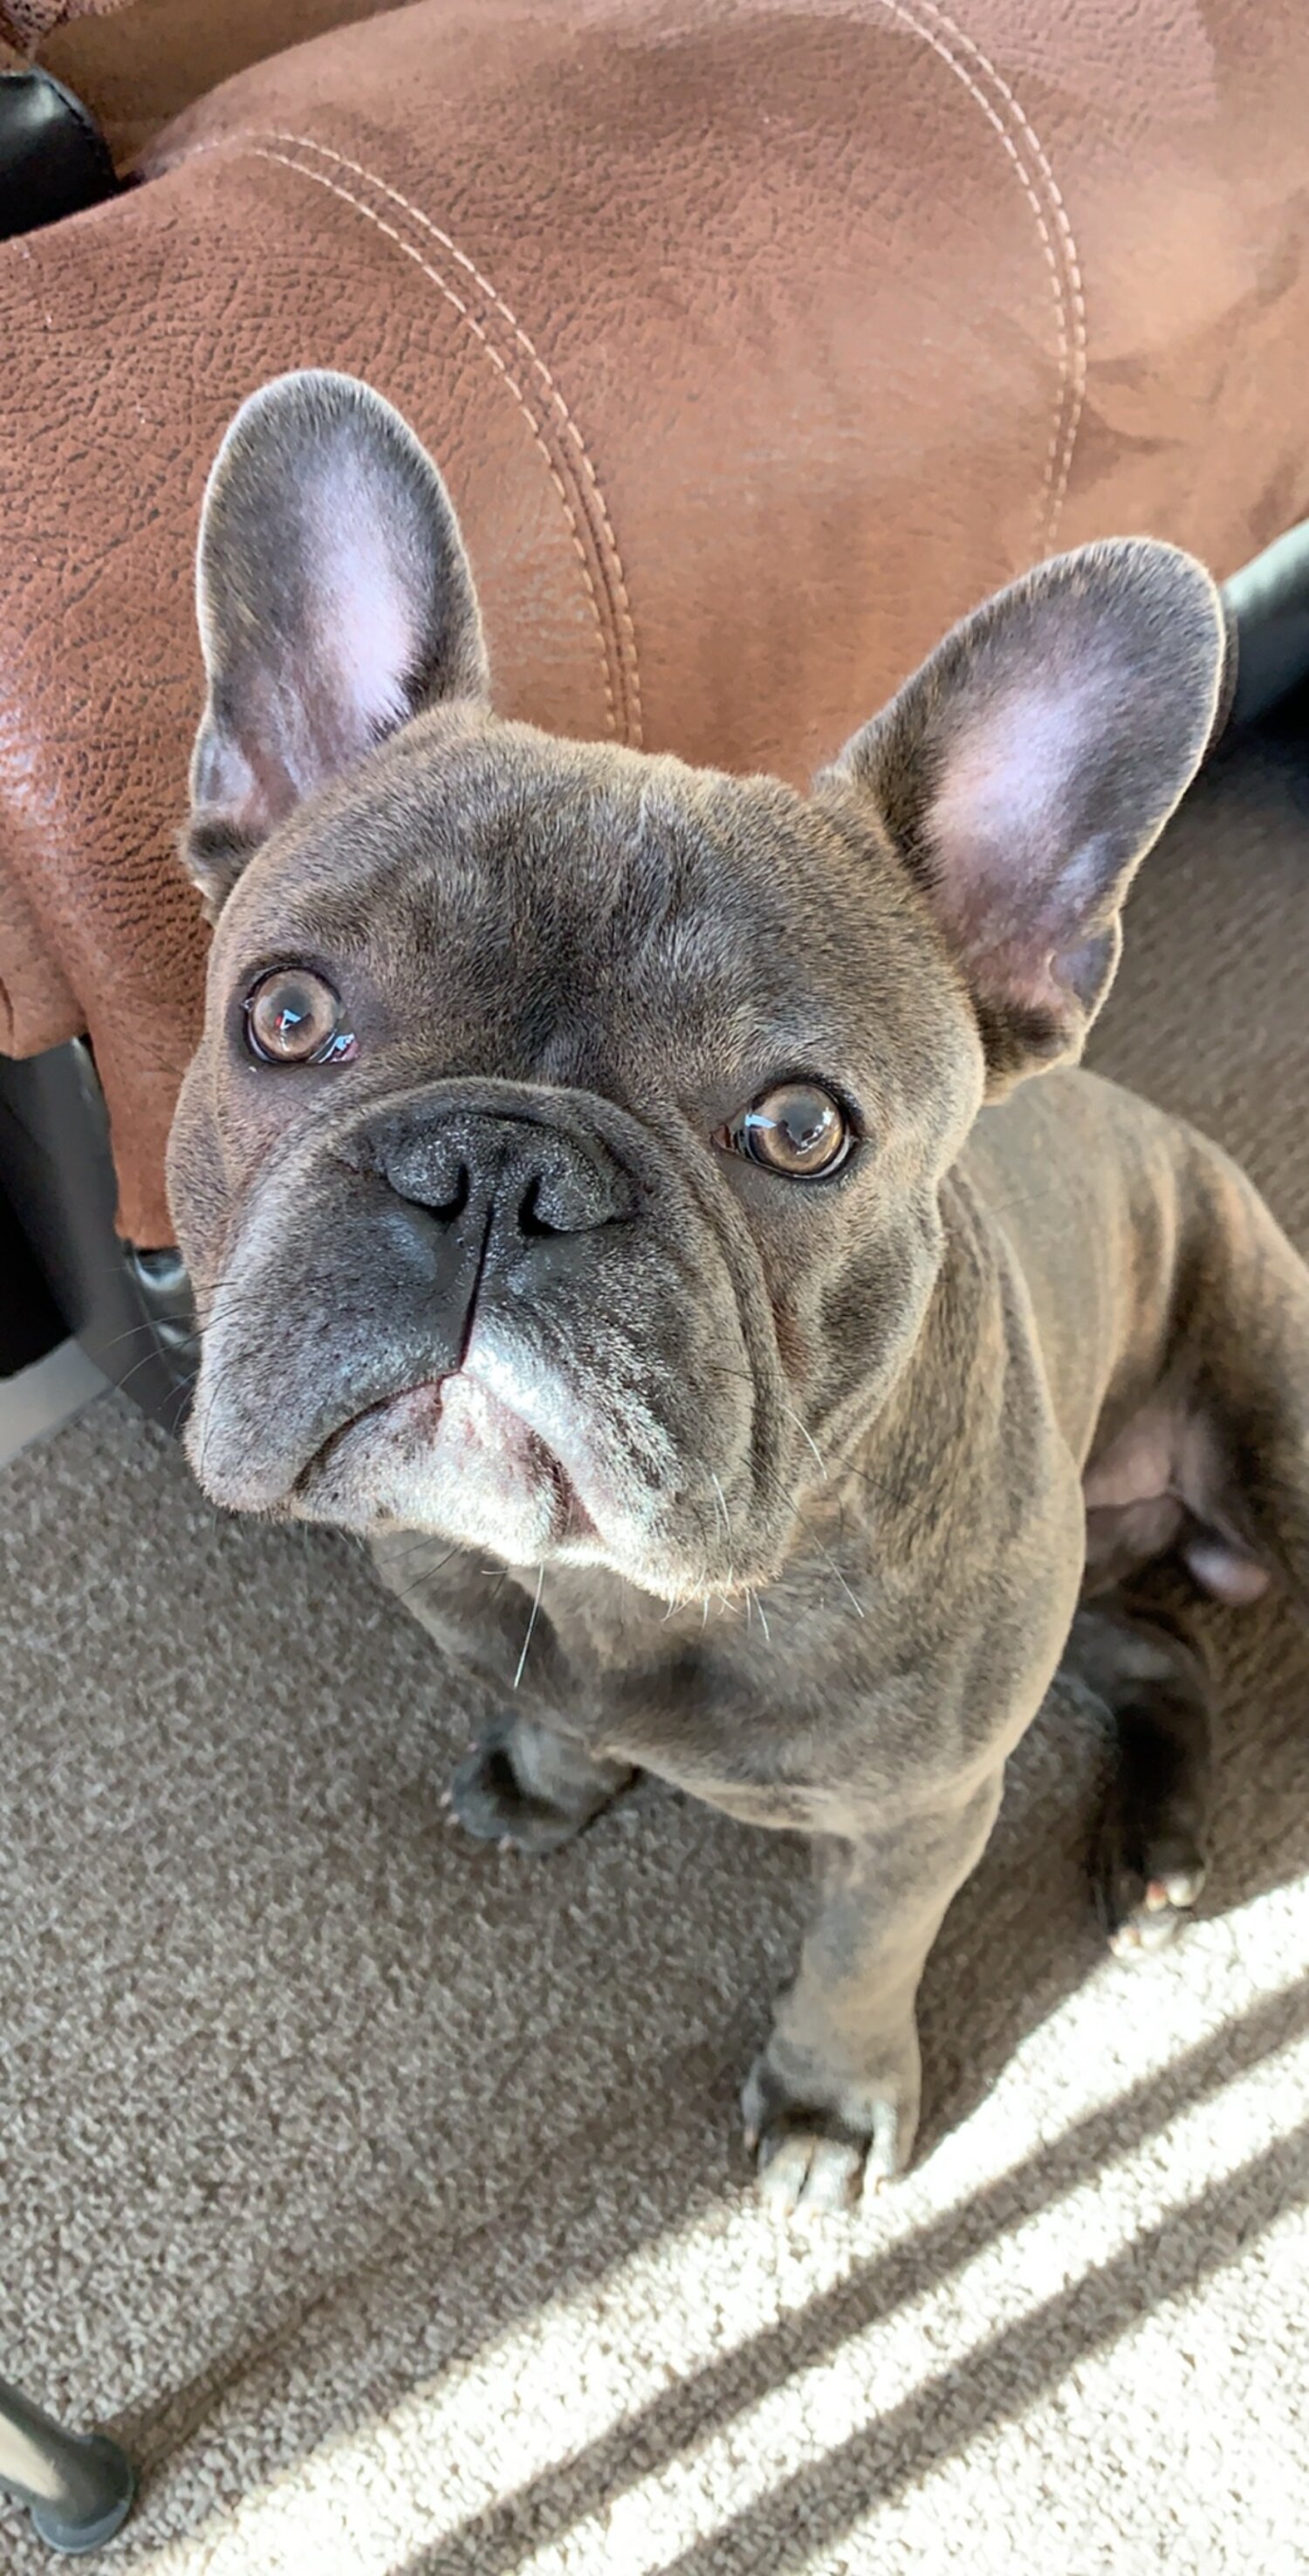 35+ French Bulldog For Sale $1000 Image - Bleumoonproductions